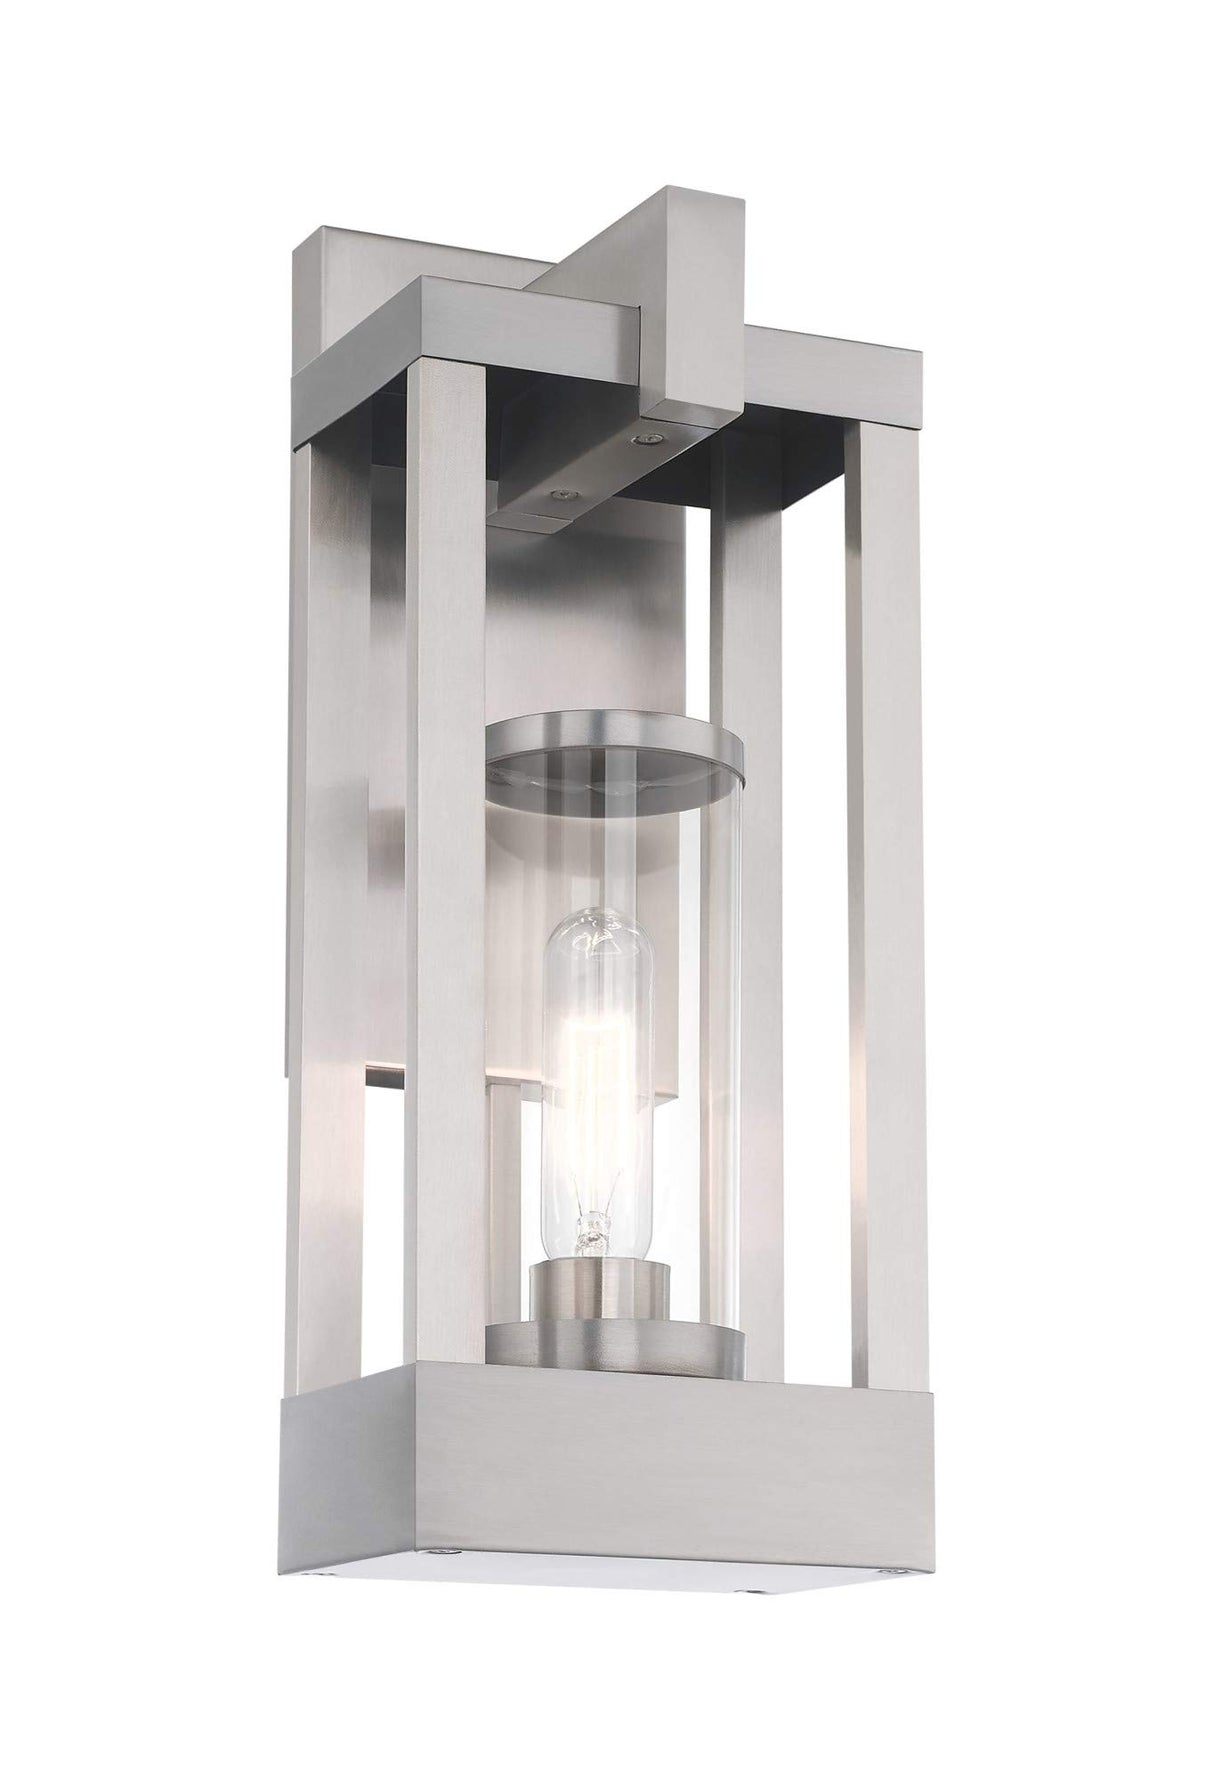 Livex Lighting 20992-91 Delancey - 16" One Light Outdoor Wall Lantern, Brushed Nickel Finish with Clear Glass